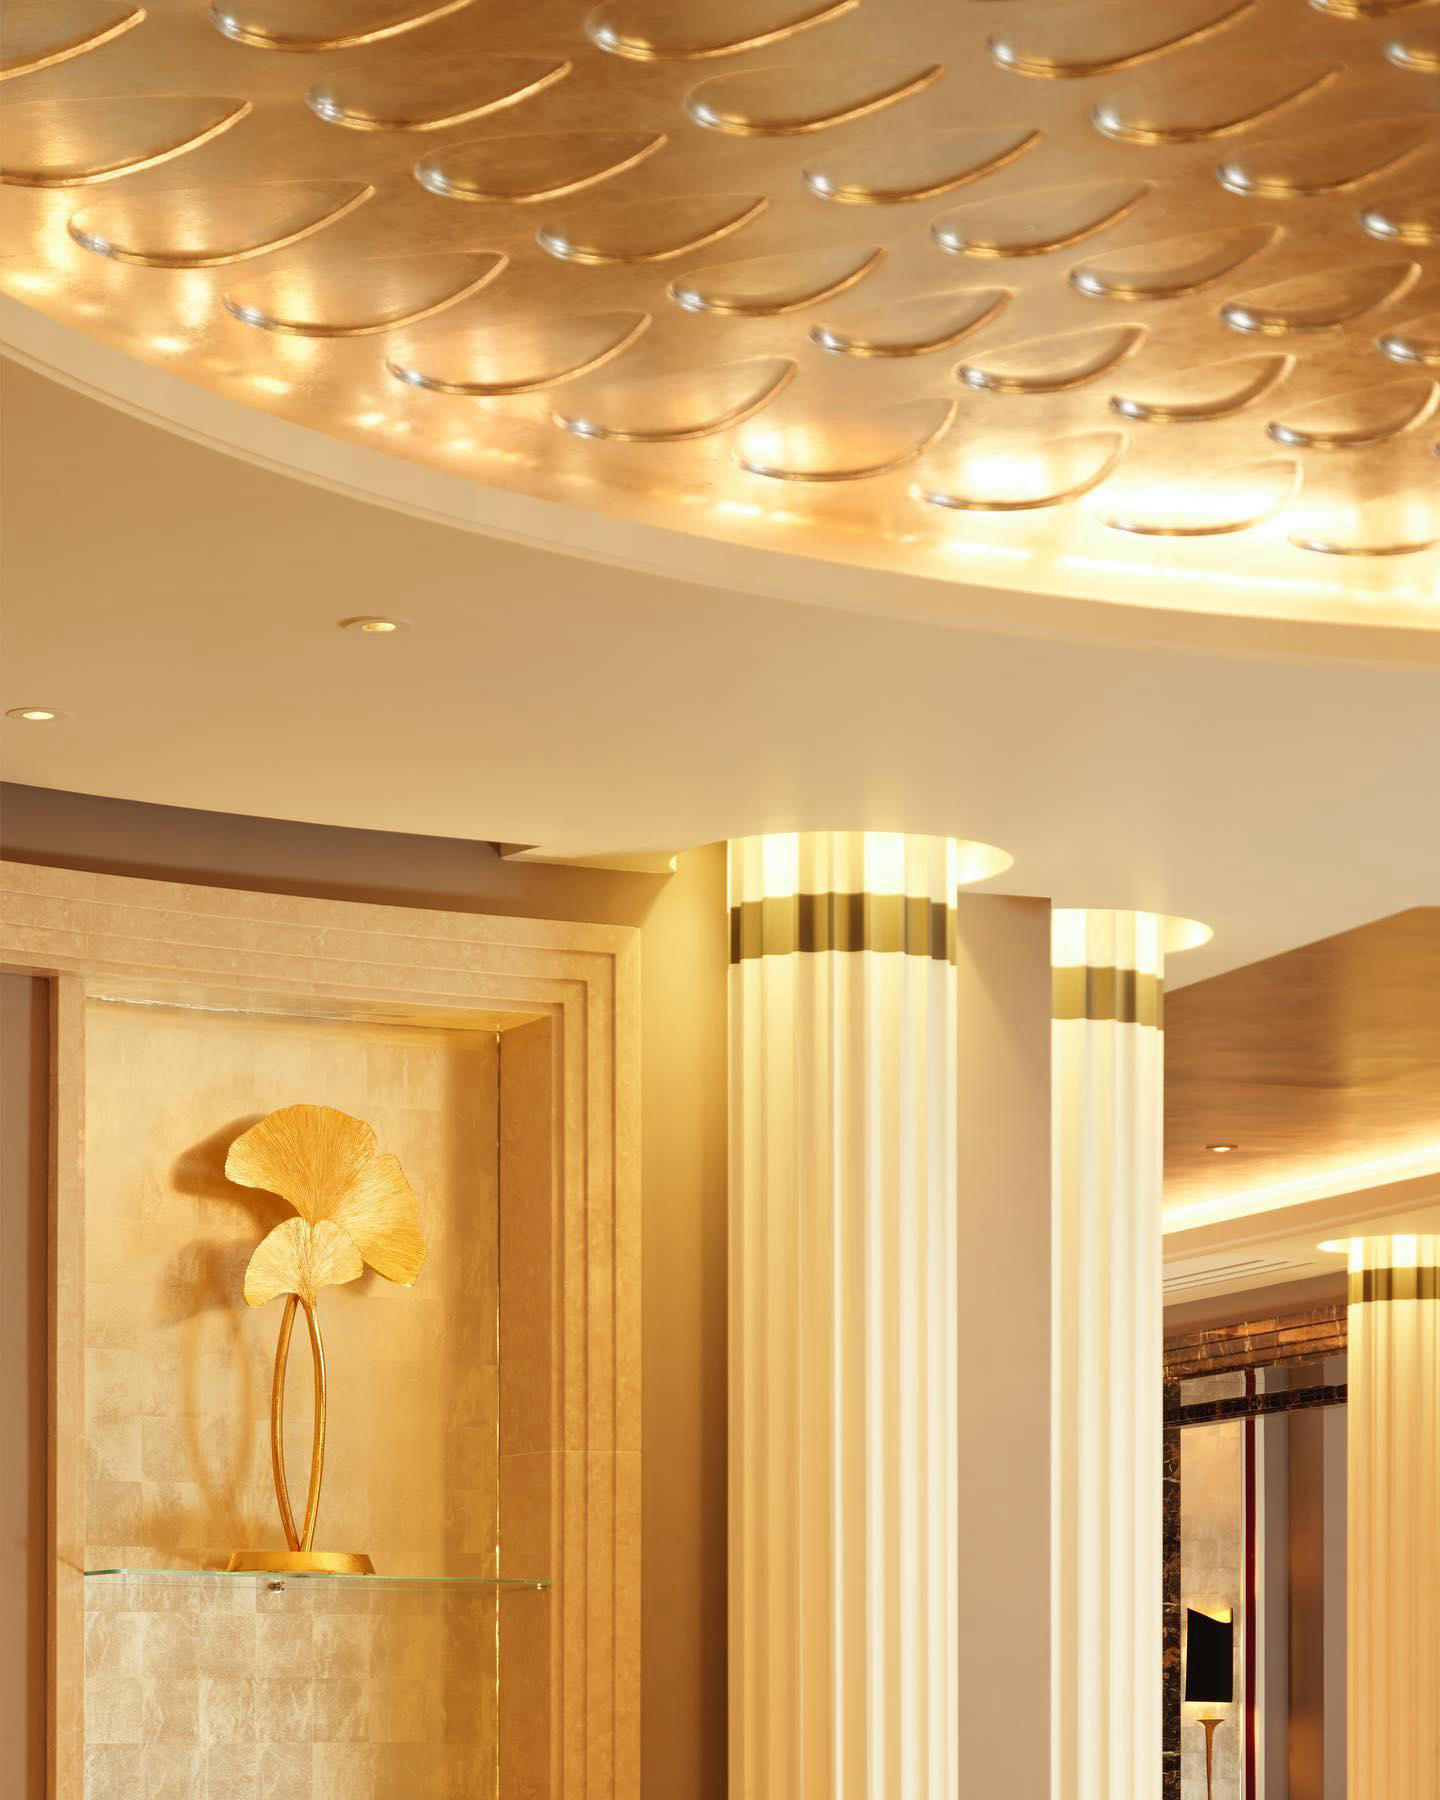 The Biltmore Mayfair - The elegant details throughout our lobby include this stunning, gold Ginkgo L